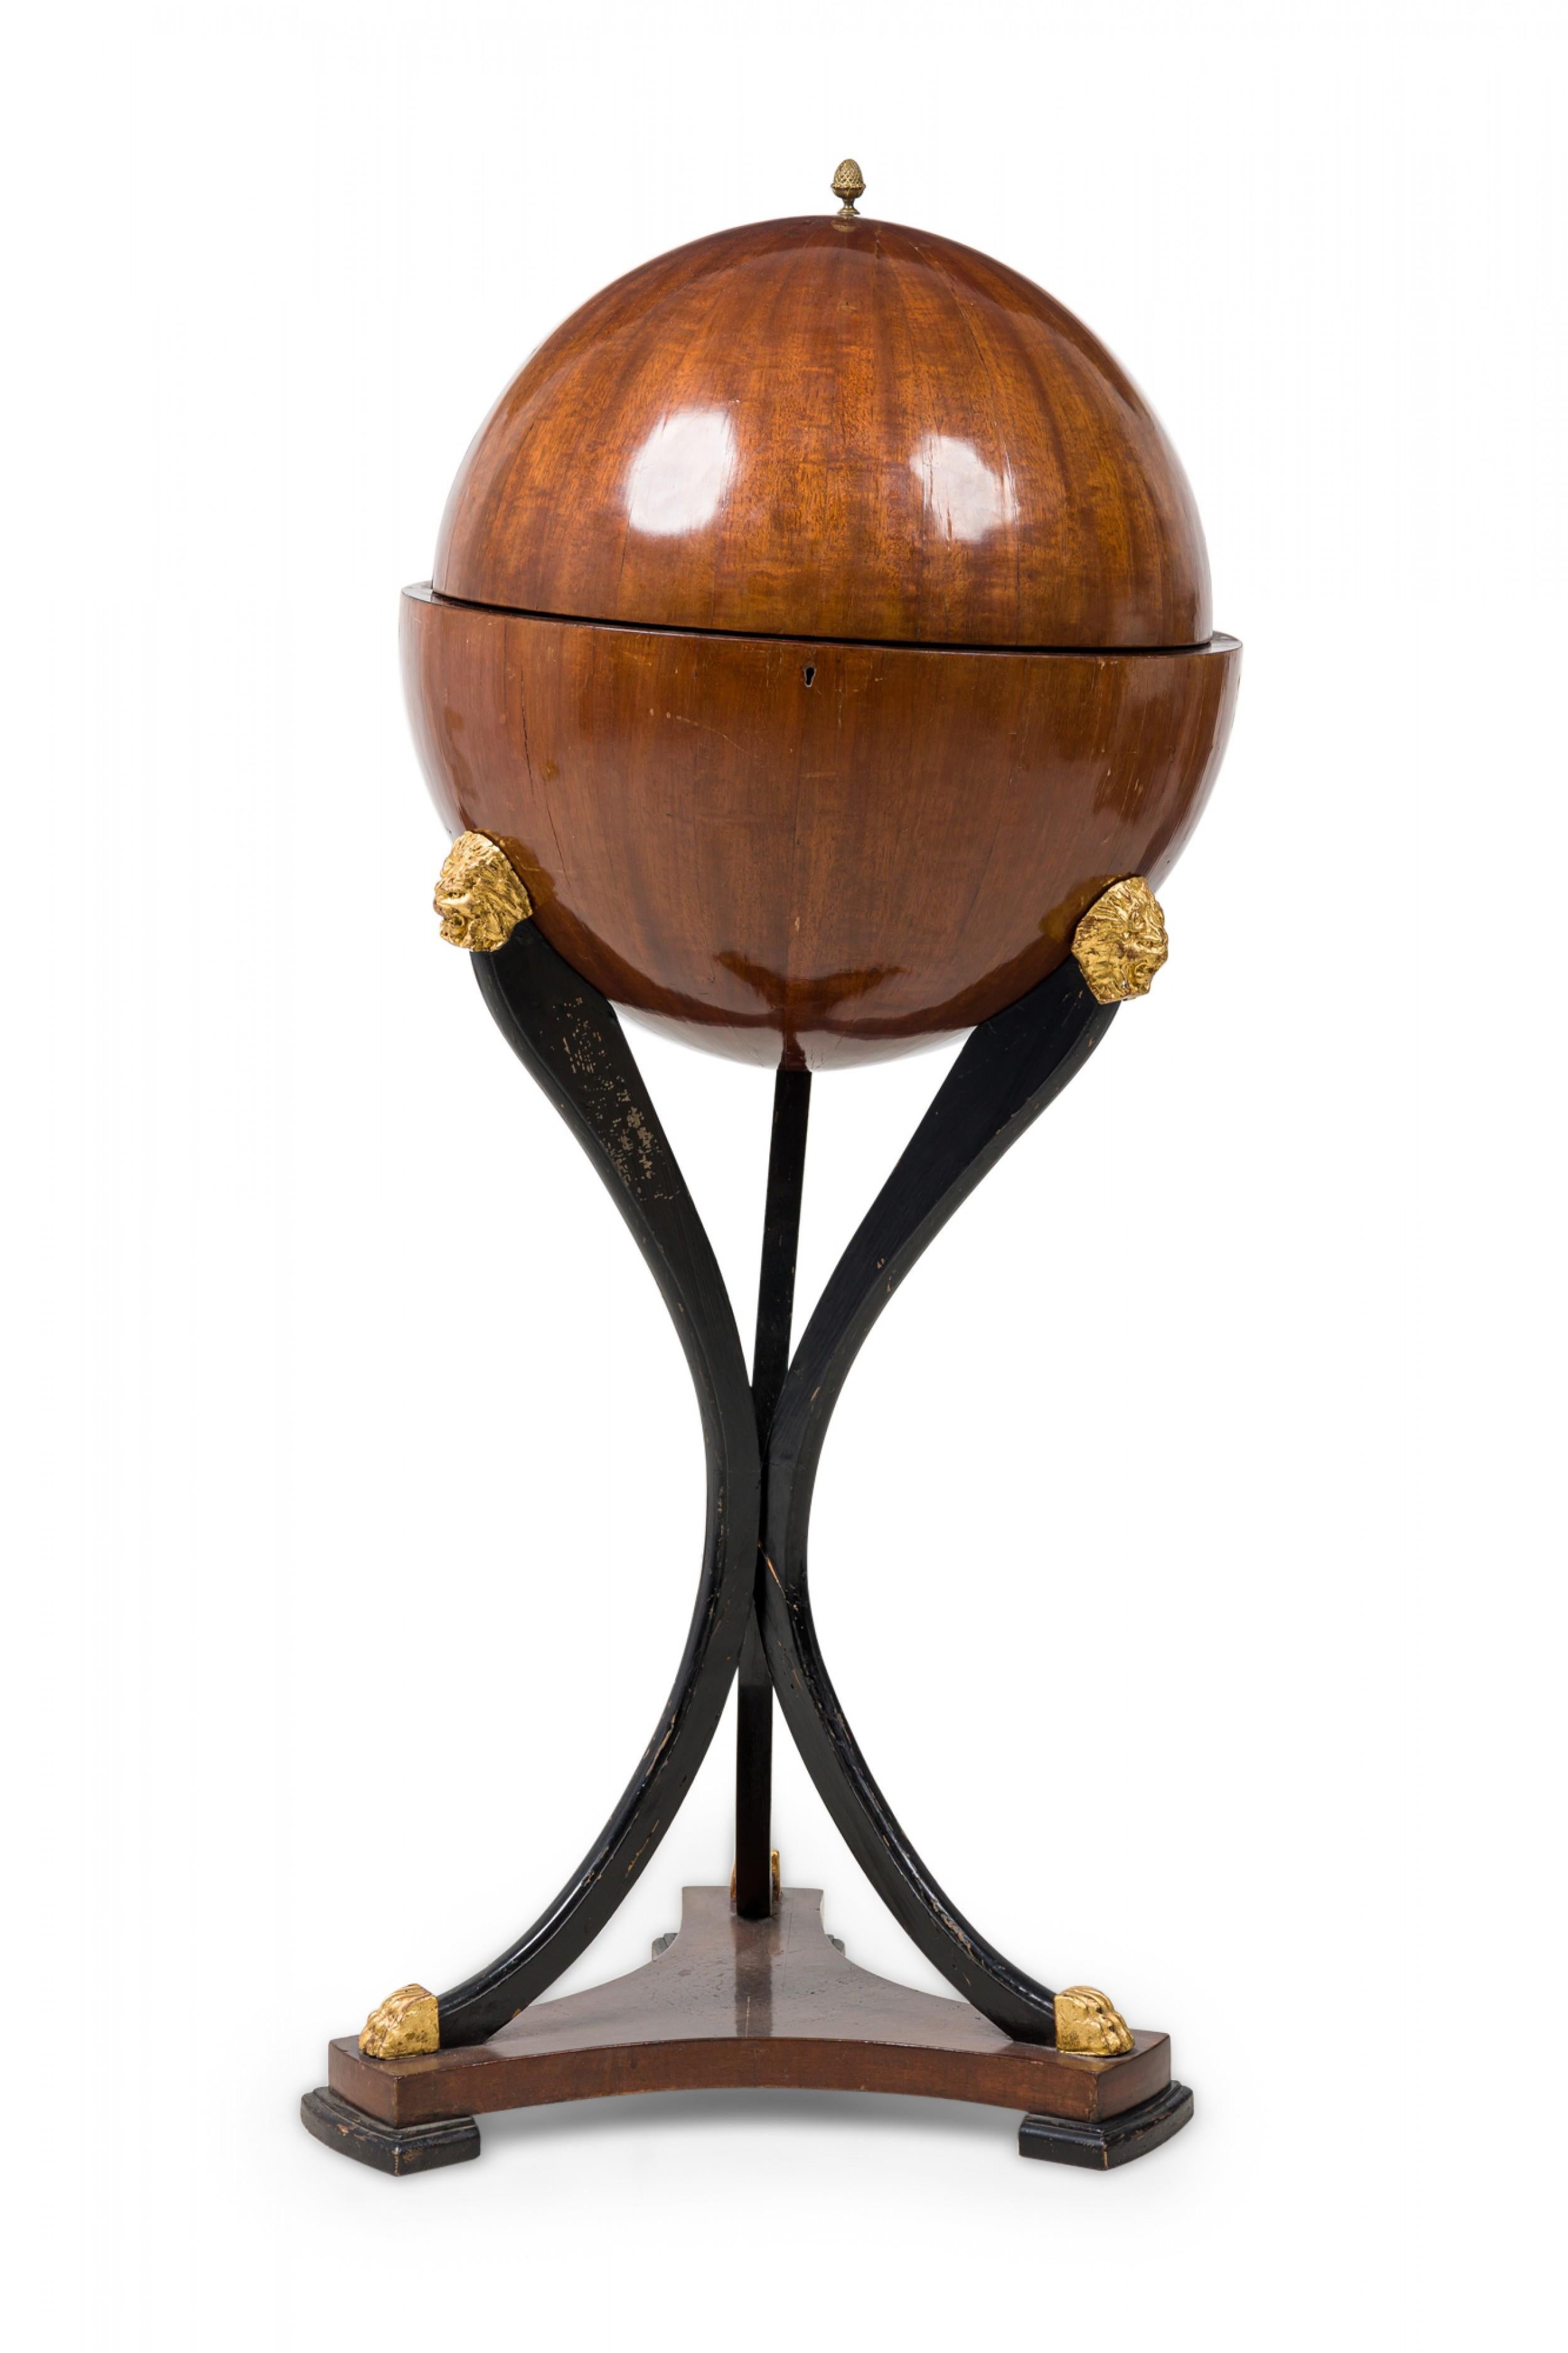 Biedermeier (19th Century) globe-form work desk with a mahogany structure that opens to reveal a several small compartments, with parcel gilt and ebonized detail, with applied lions\' head decorations at the top of each leg and a brass artichoke